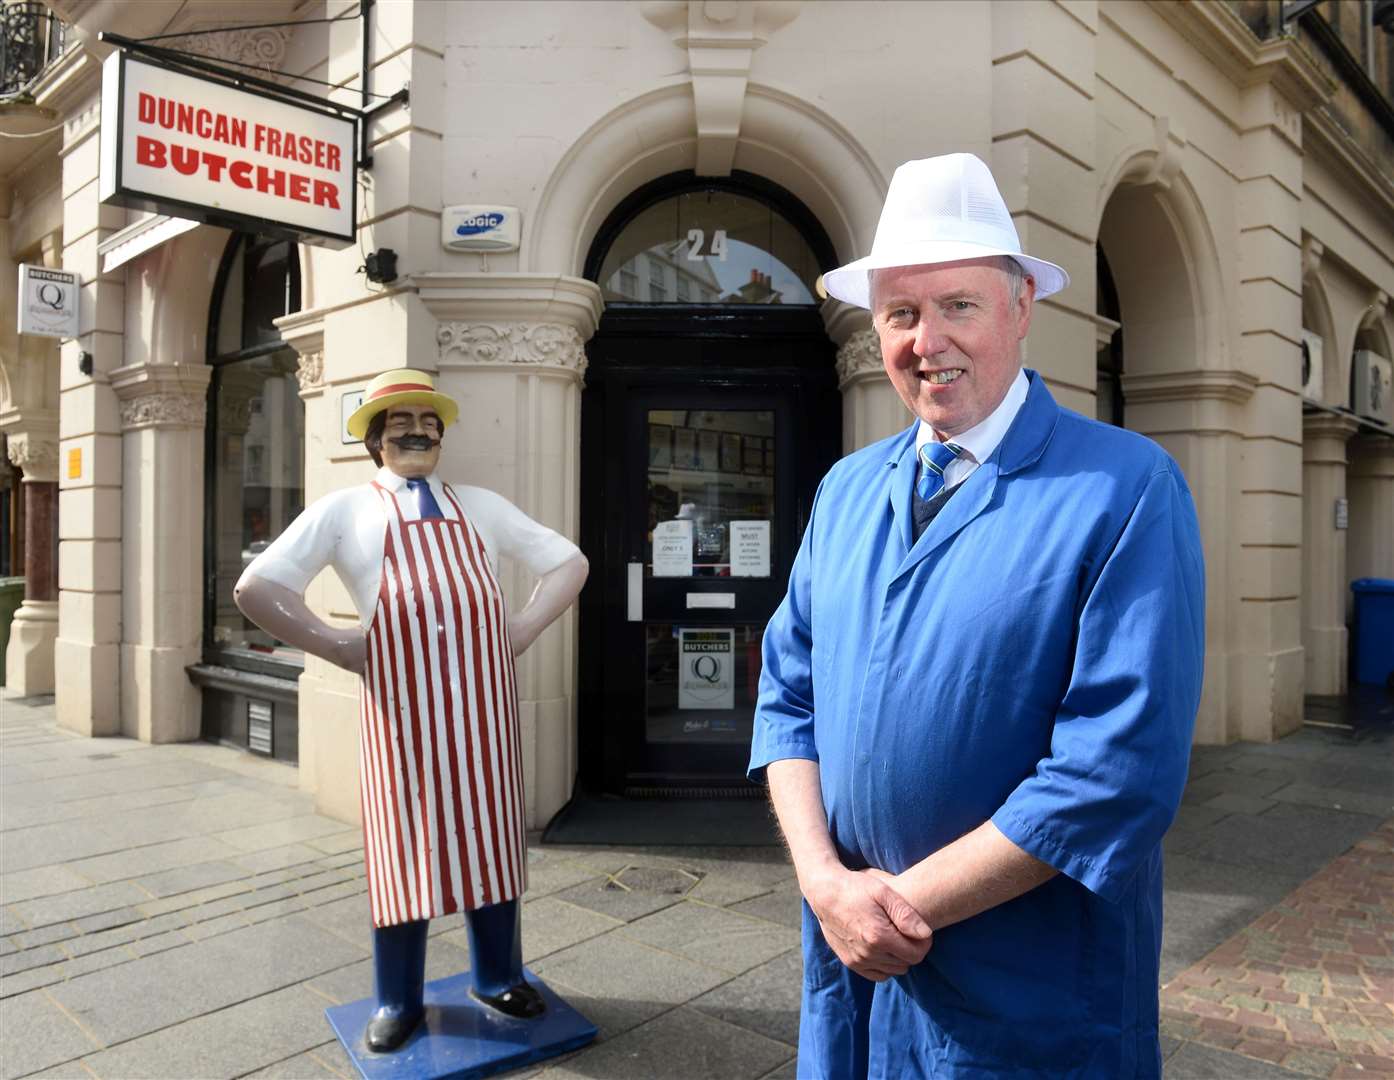 Duncan Fraser Butchers. Duncan Fraser is retiring and has sold his business to Munro's. Picture: Gary Anthony